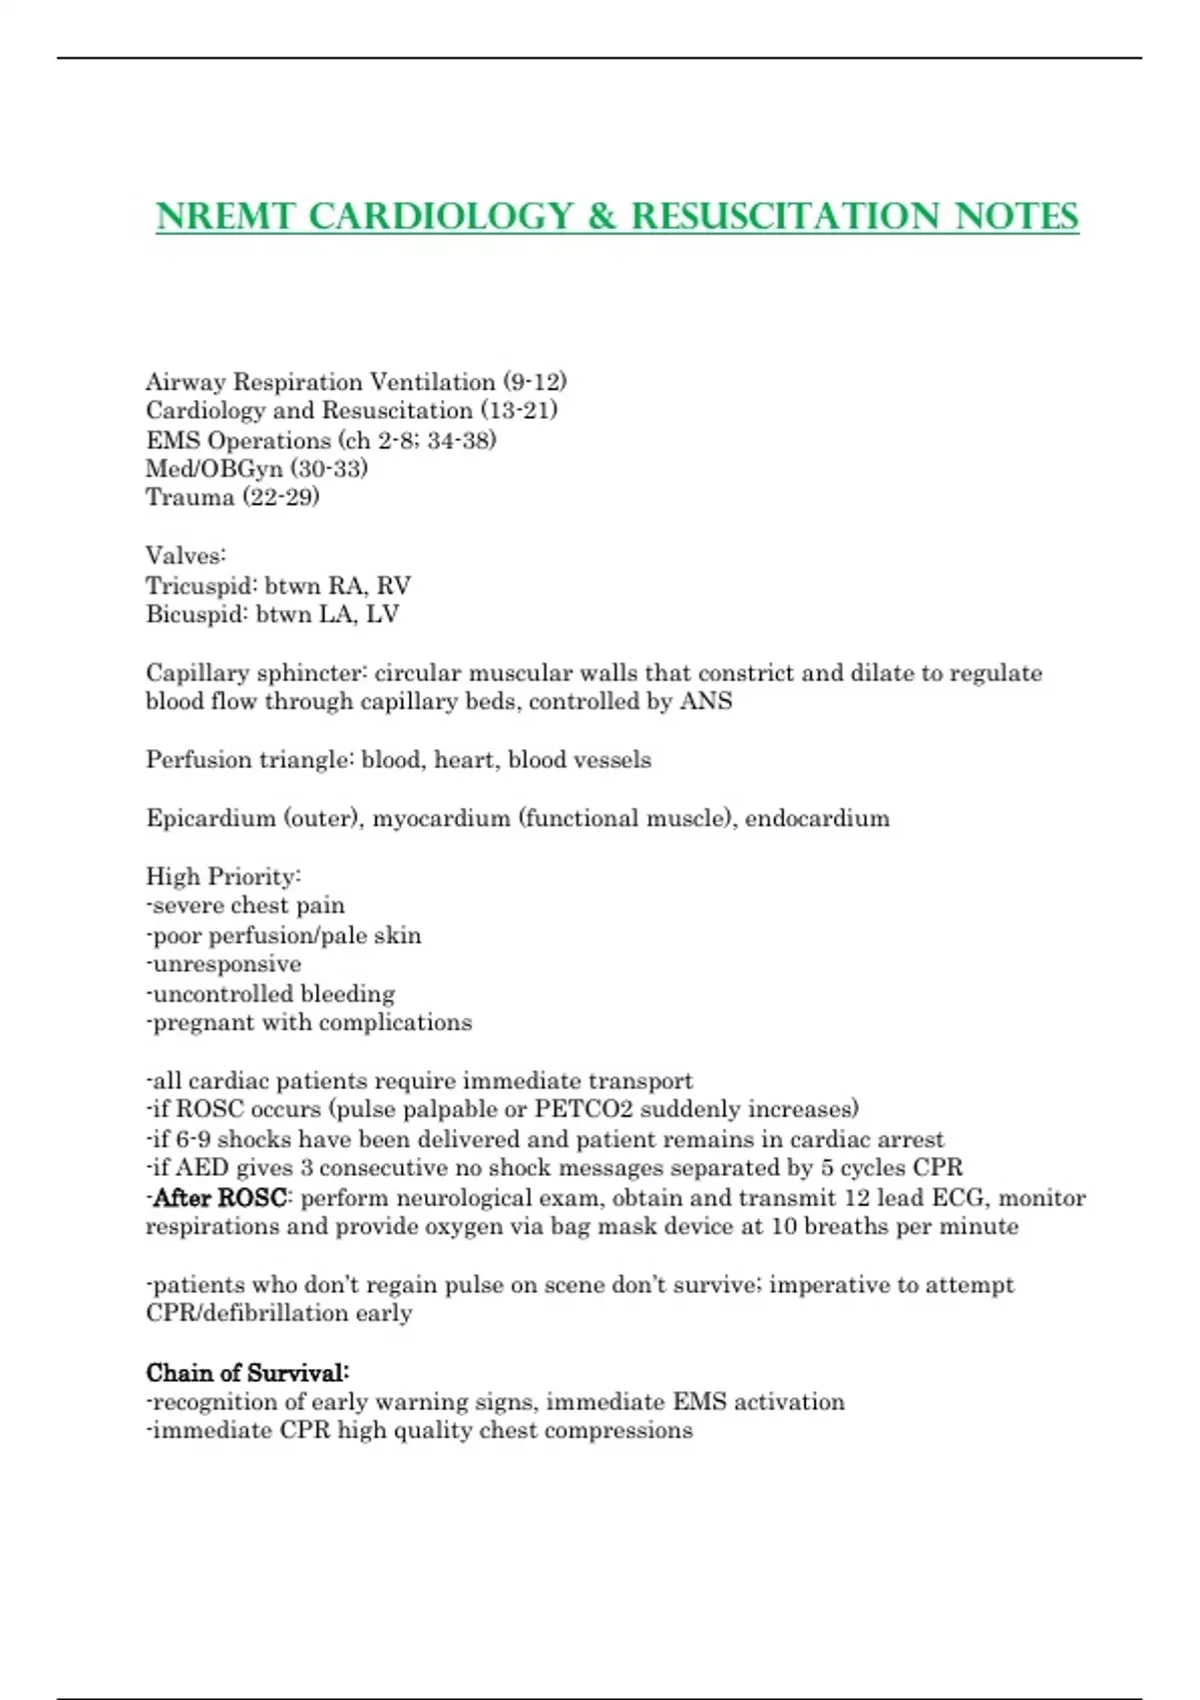 Summary NREMT Cardiology & Resuscitation Study Guide Notes ( Latest